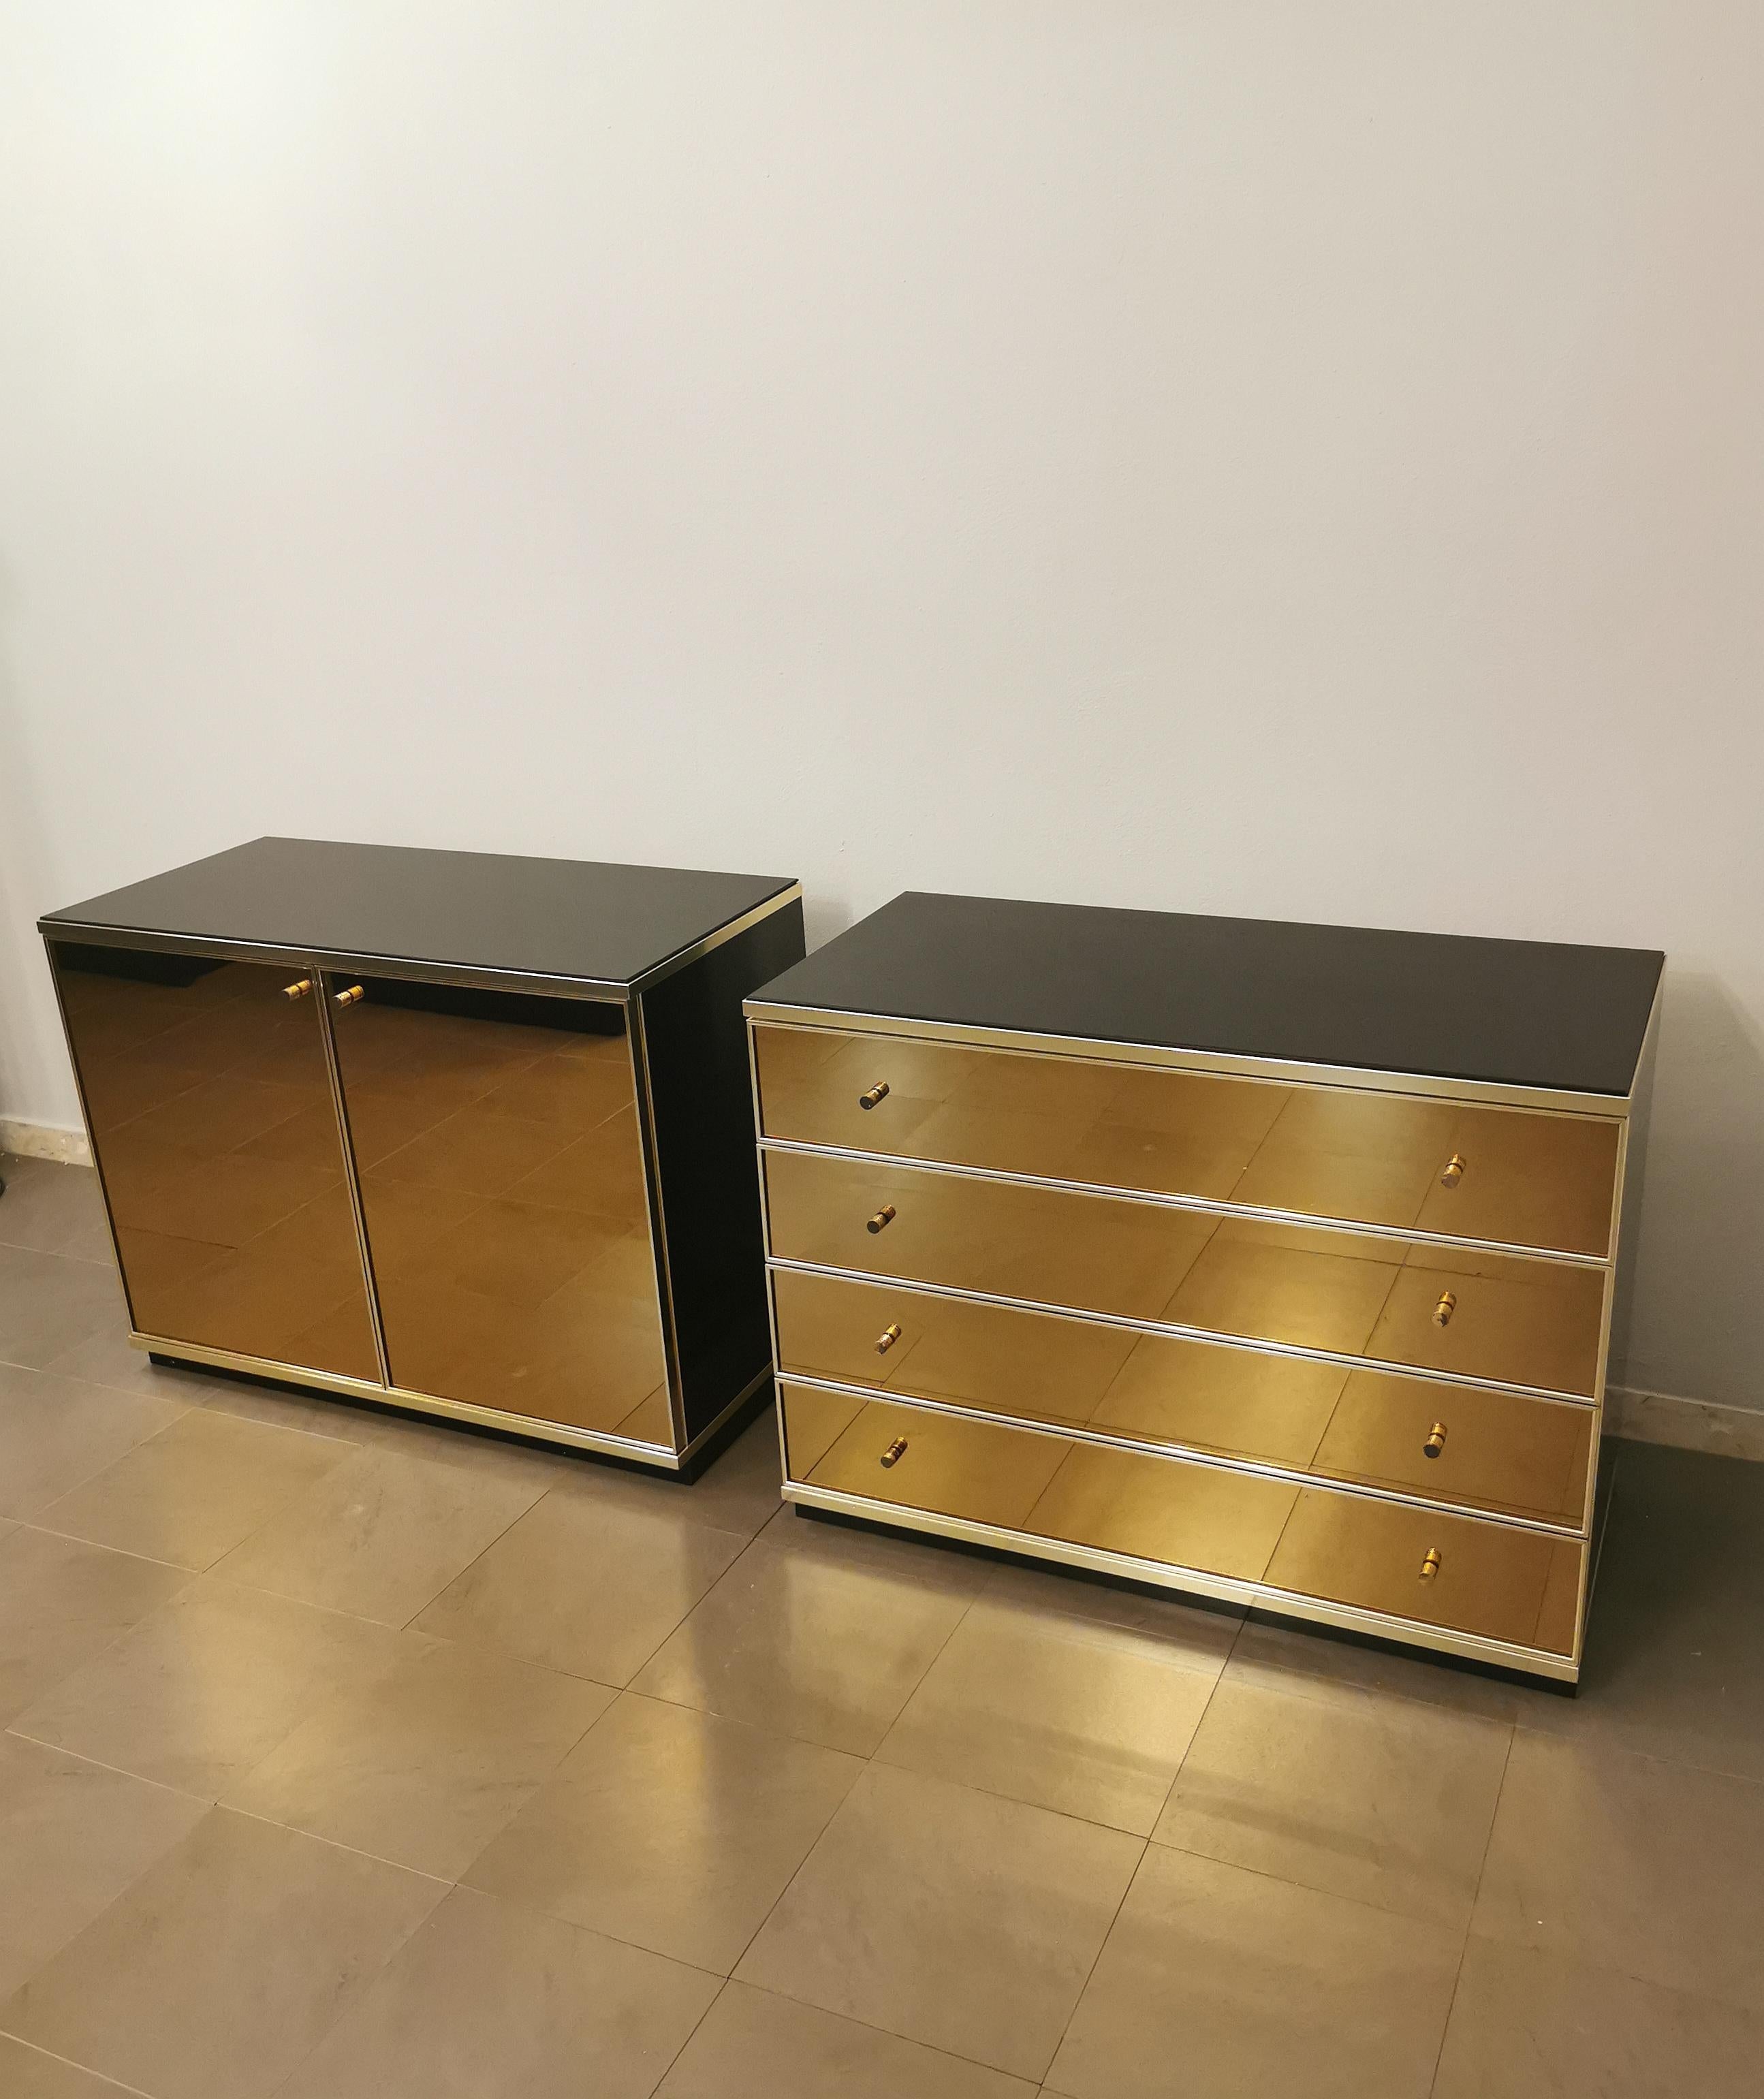 A buffet and a chest of drawers designed by the Italian designer Renato Zevi in the 70s. This elegant set has a black lacquered wood structure, dark glass top and doors and drawers in bronzed mirrored glass with sand-colored suede inside. Finishes